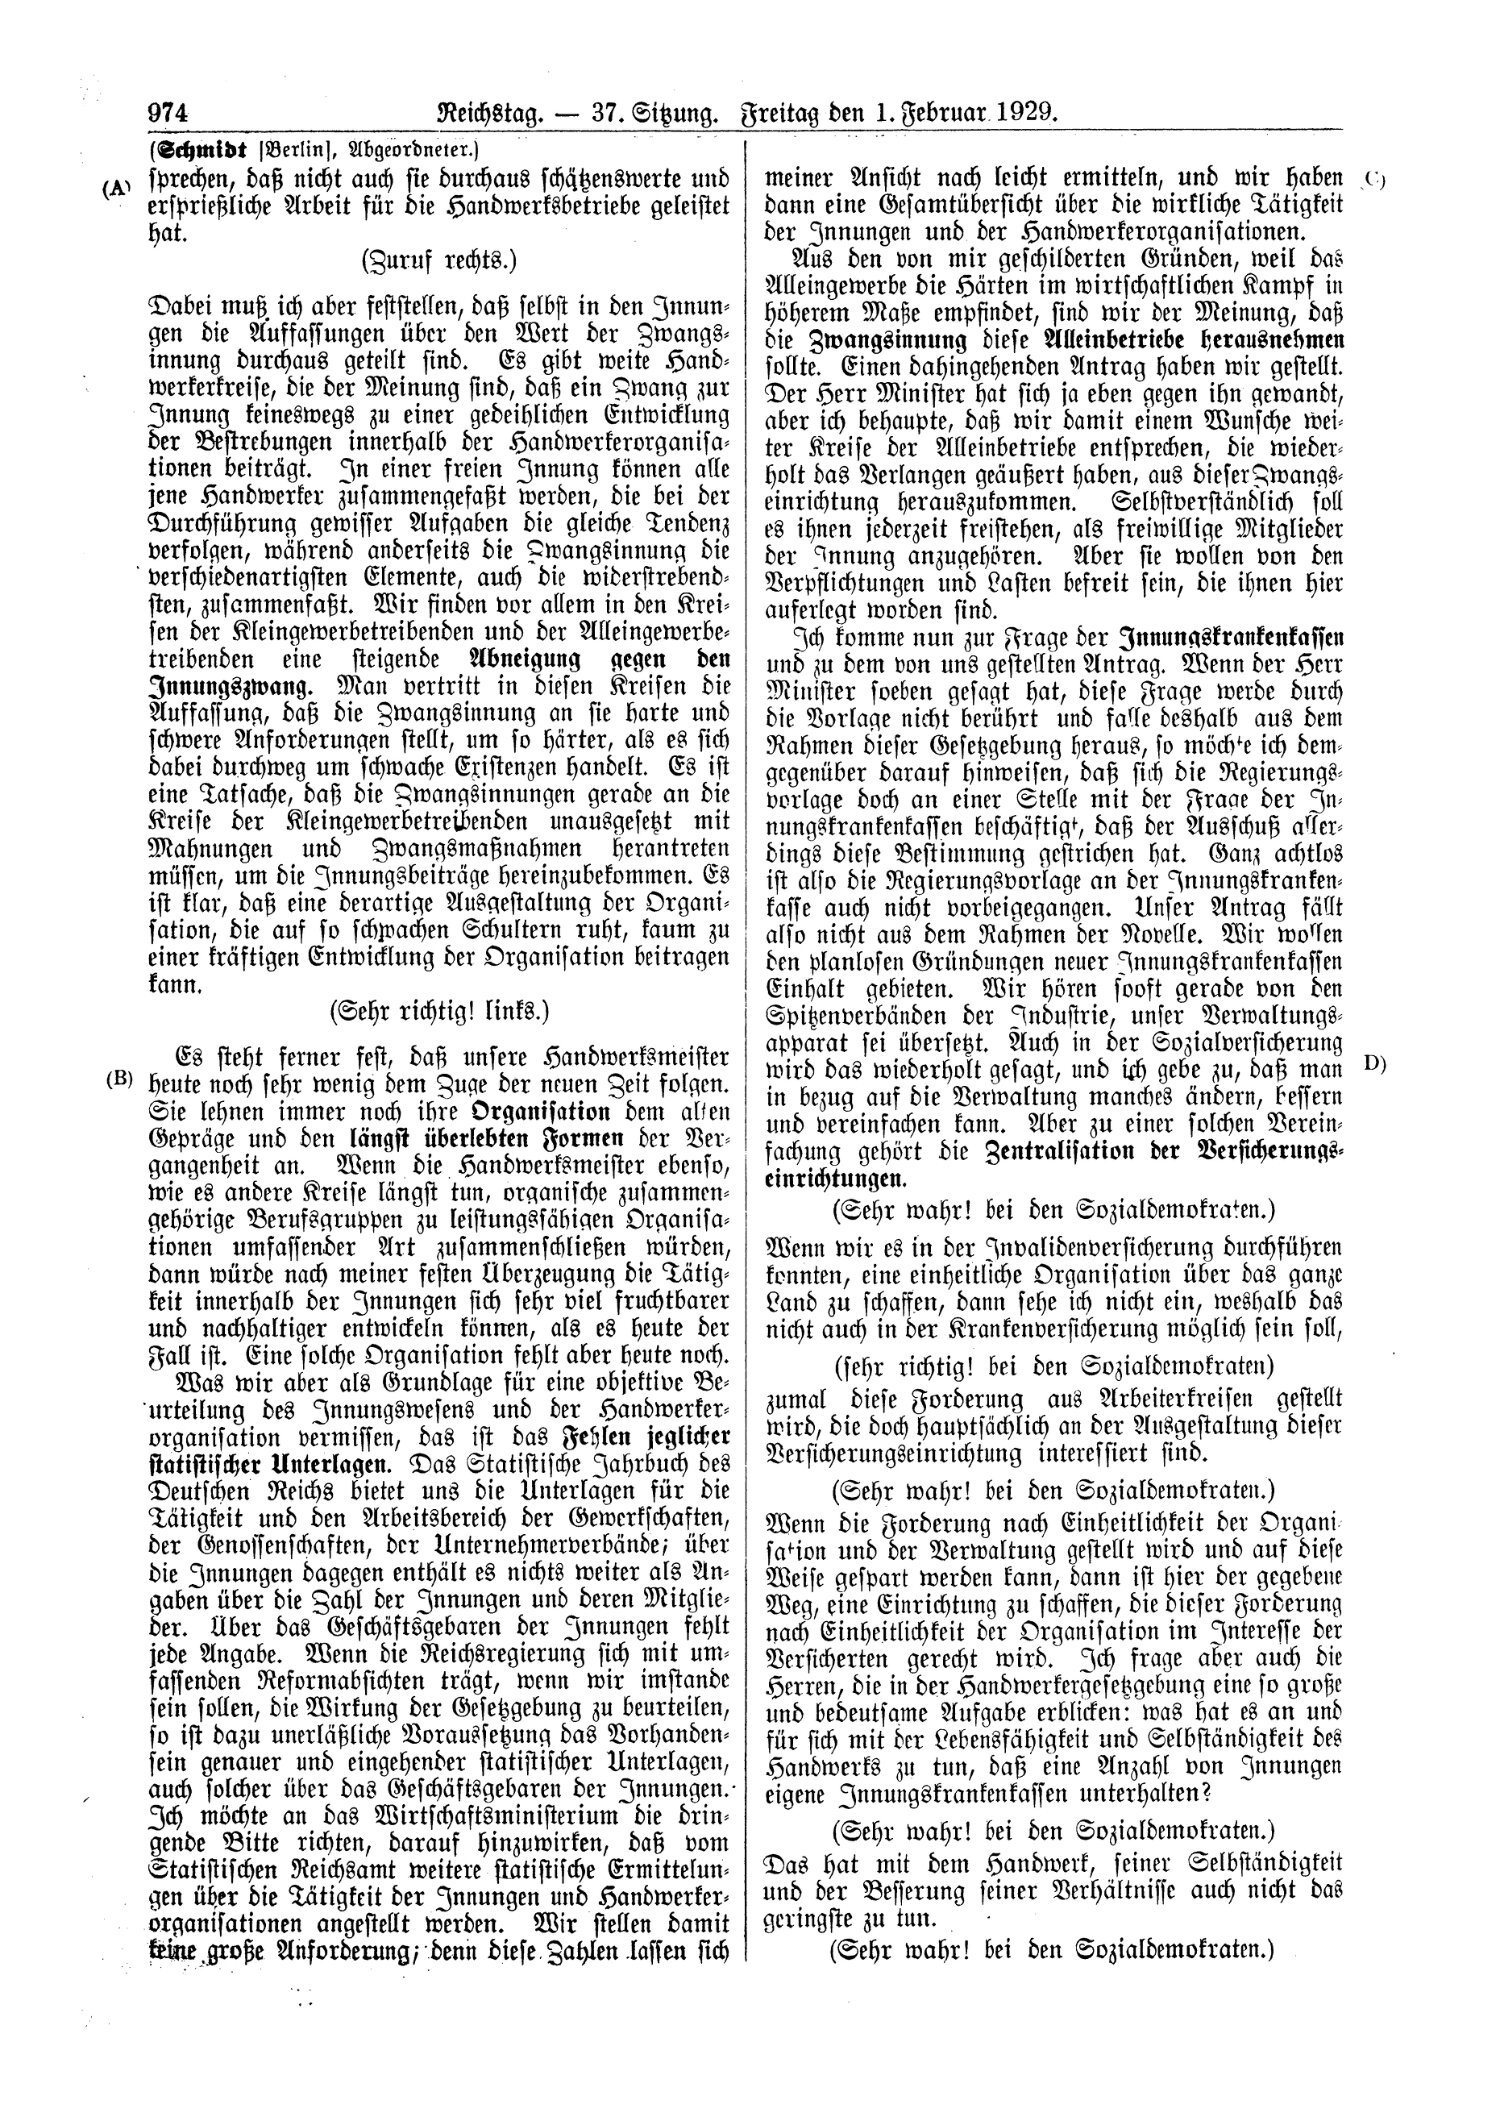 Scan of page 974